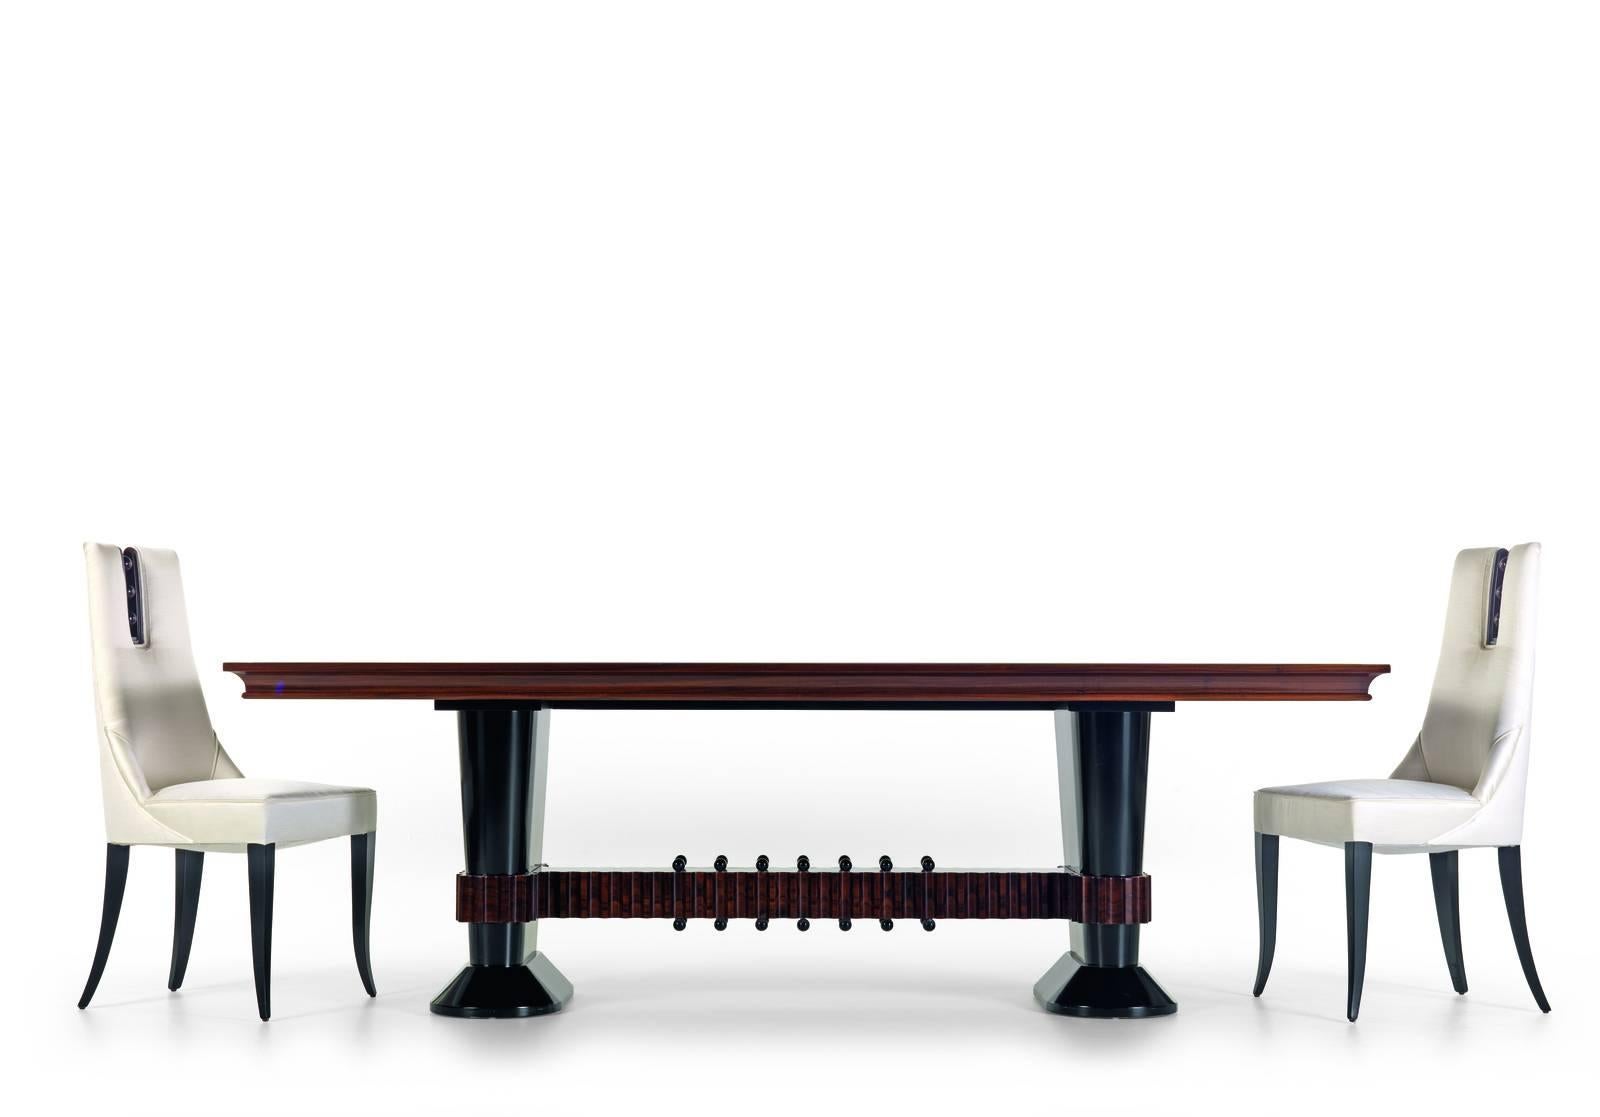 The structure of this elegant dining table was made in walnut wood and its two sets of legs are held together at the bottom by an element, also in walnut, that is accented by striking grooves and knots and functions as a footrest. Its finish is the